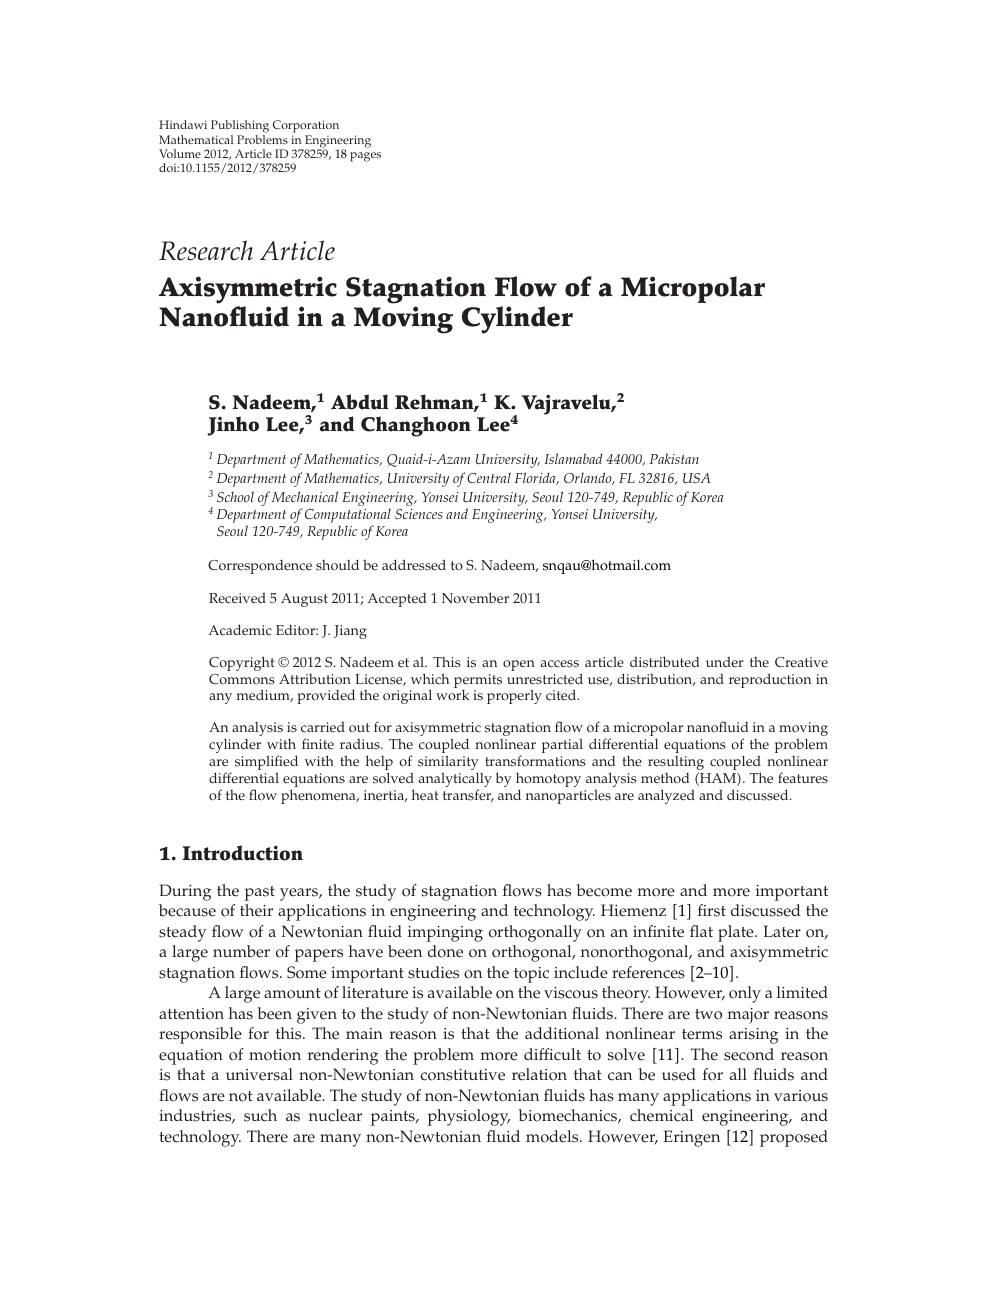 Axisymmetric Stagnation Flow Of A Micropolar Nanofluid In A Moving Cylinder Topic Of Research Paper In Mathematics Download Scholarly Article Pdf And Read For Free On Cyberleninka Open Science Hub